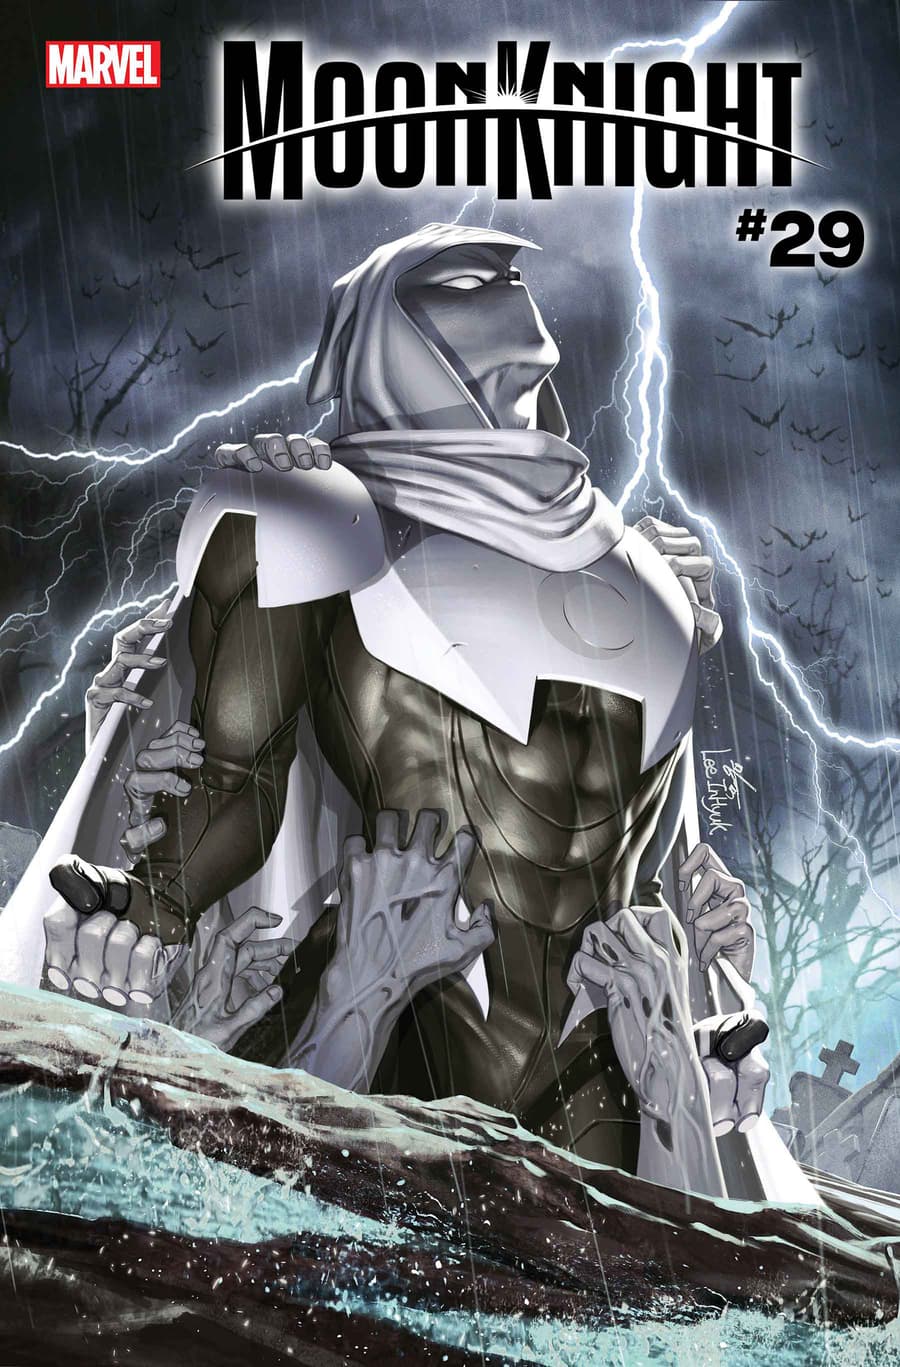 MOON KNIGHT #29 Last Days of Moon Knight Variant Cover by Inhyuk Lee